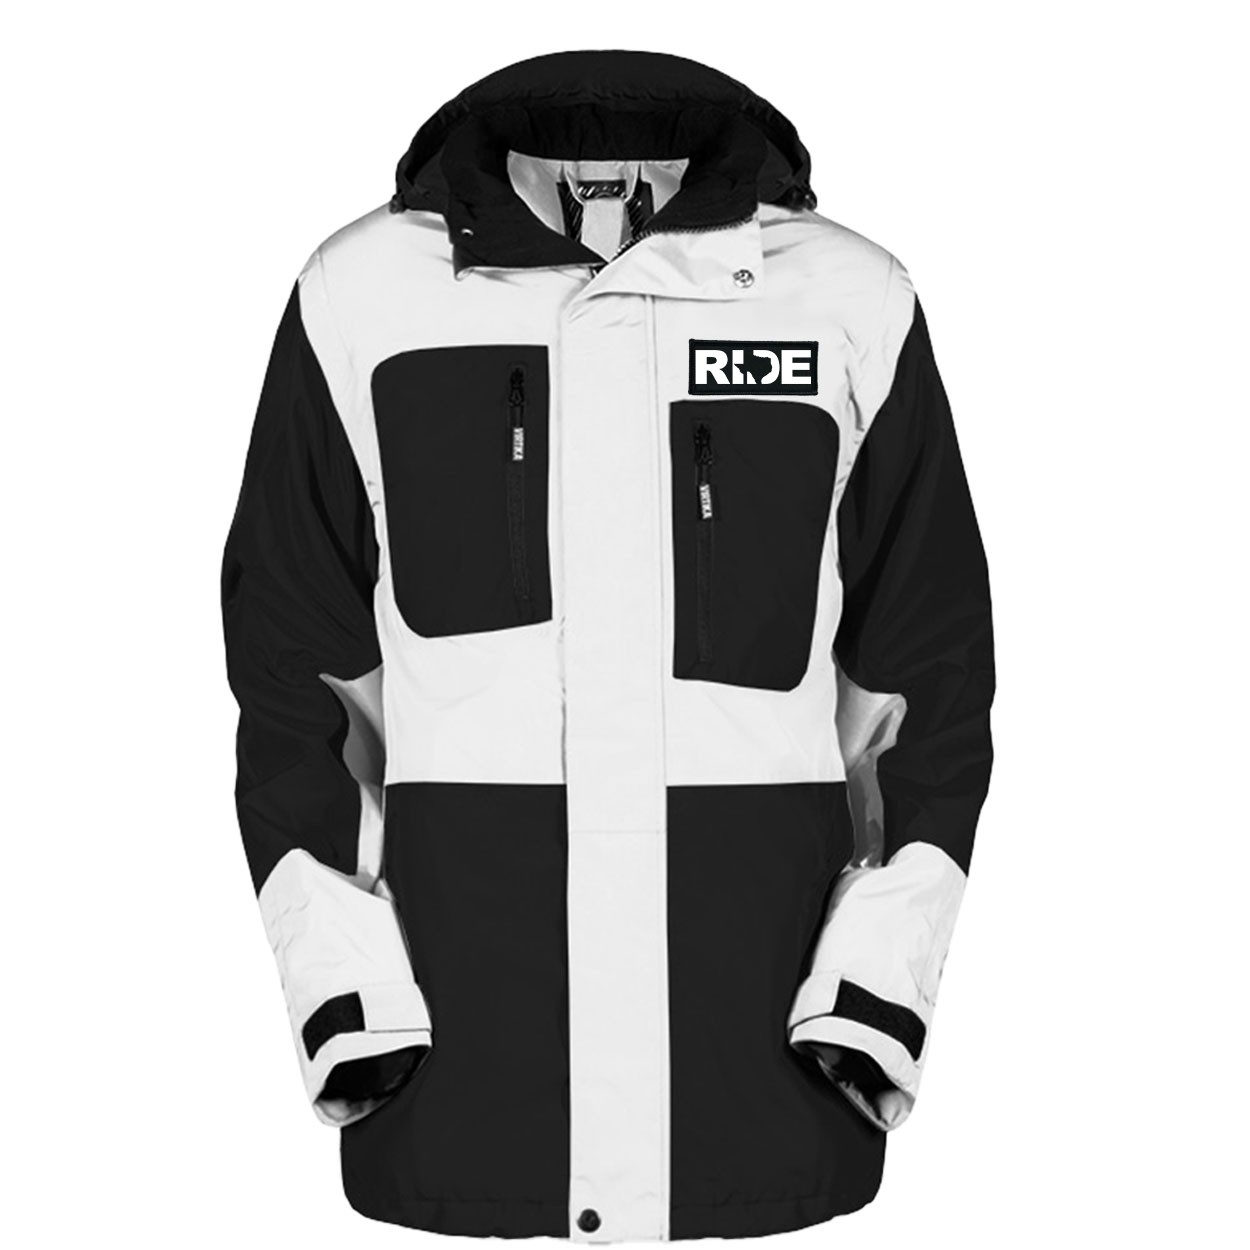 Ride Texas Classic Woven Patch Pro Snowboard Jacket (Black/White)